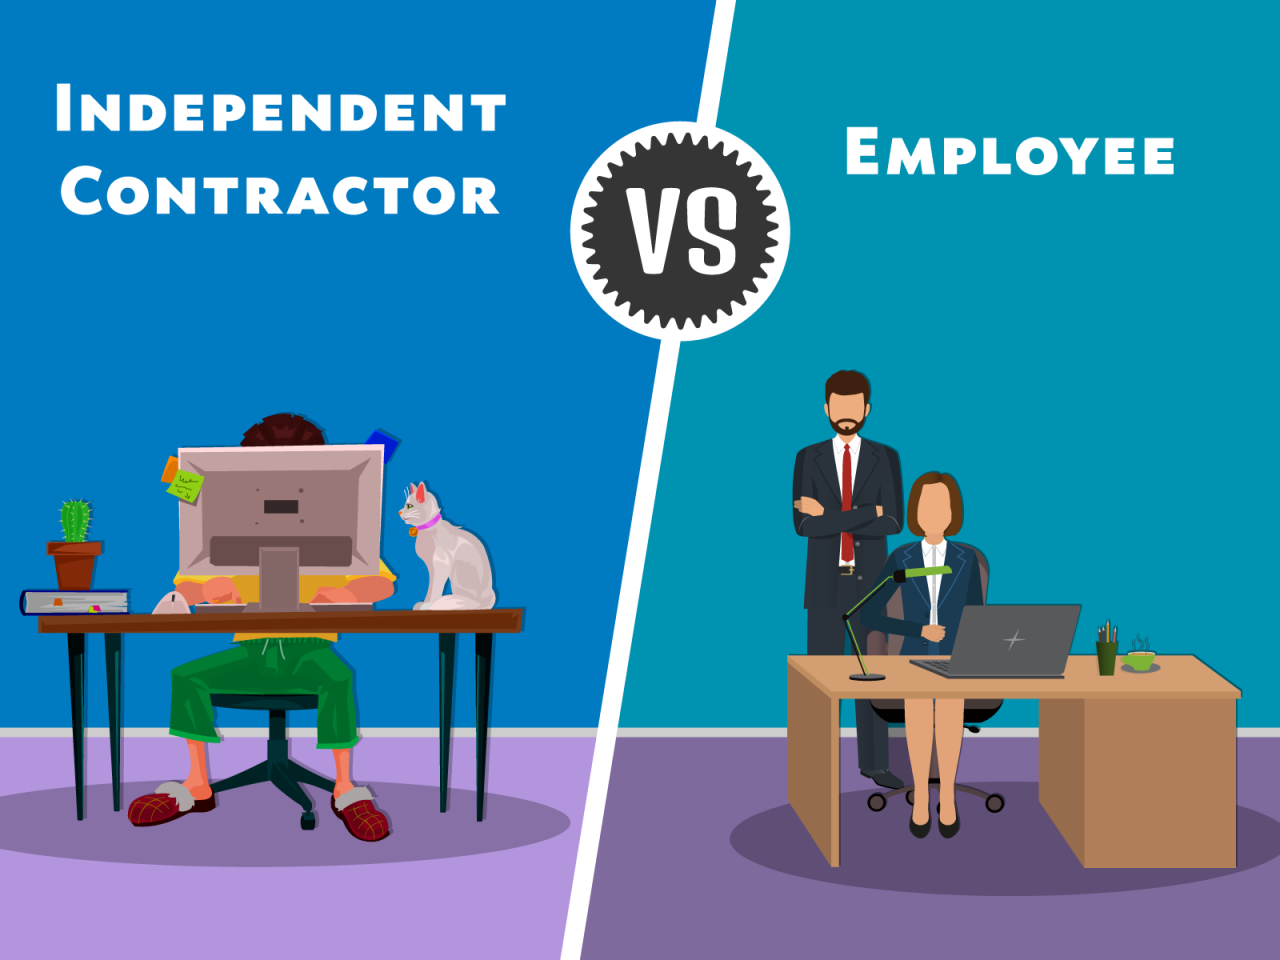 Being an independent contractor vs employee